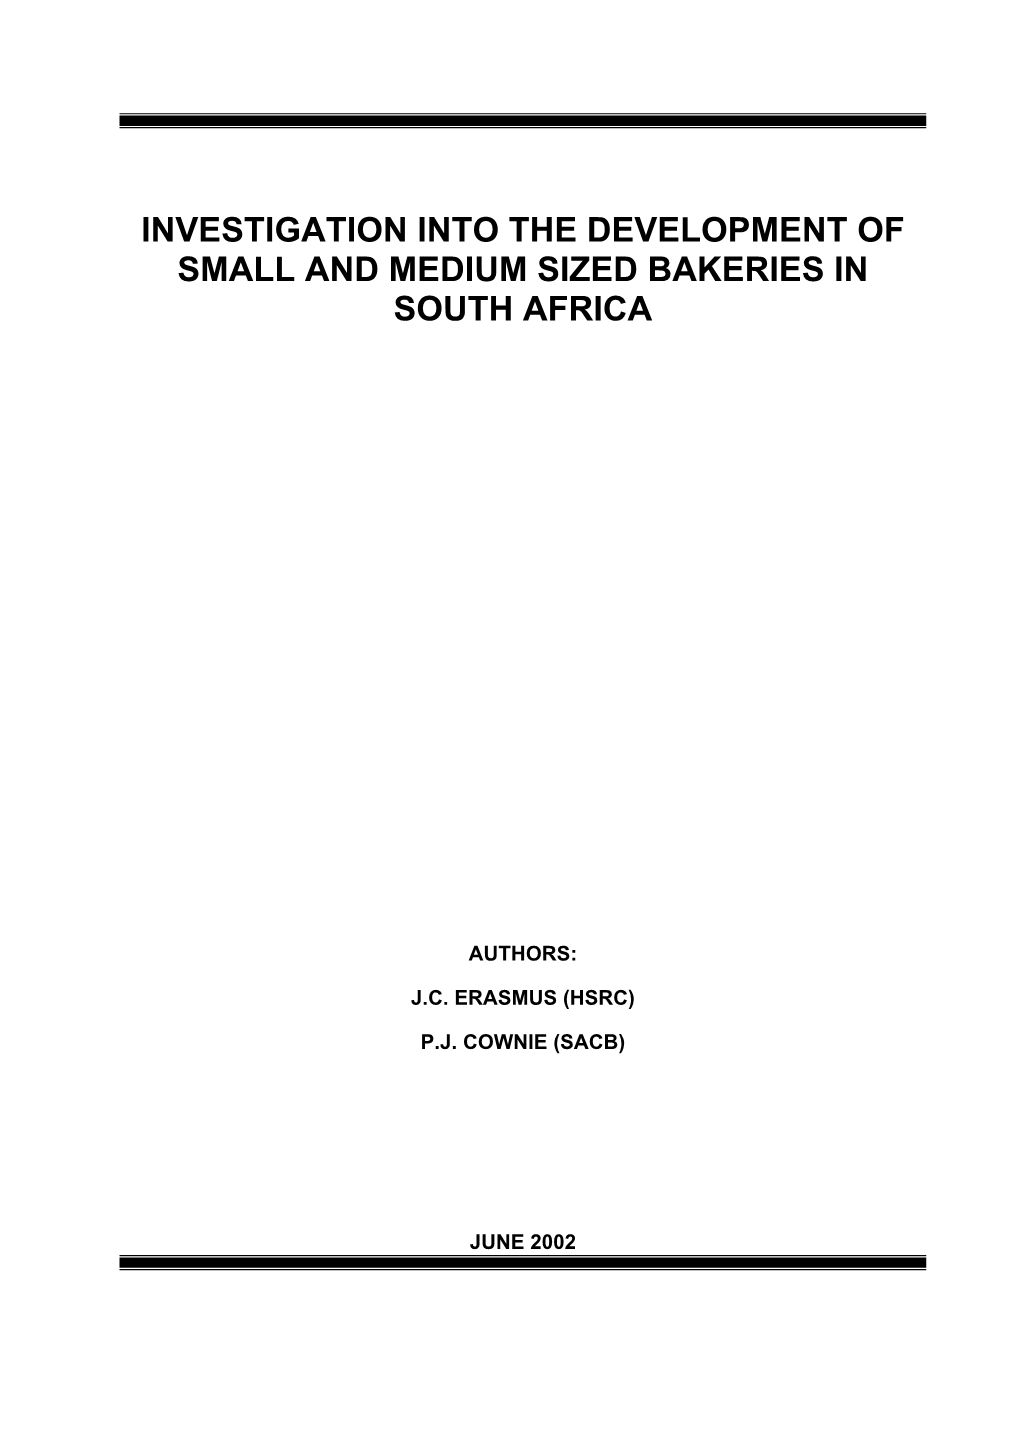 Investigation Into the Development of Small and Medium Sized Bakeries in South Africa